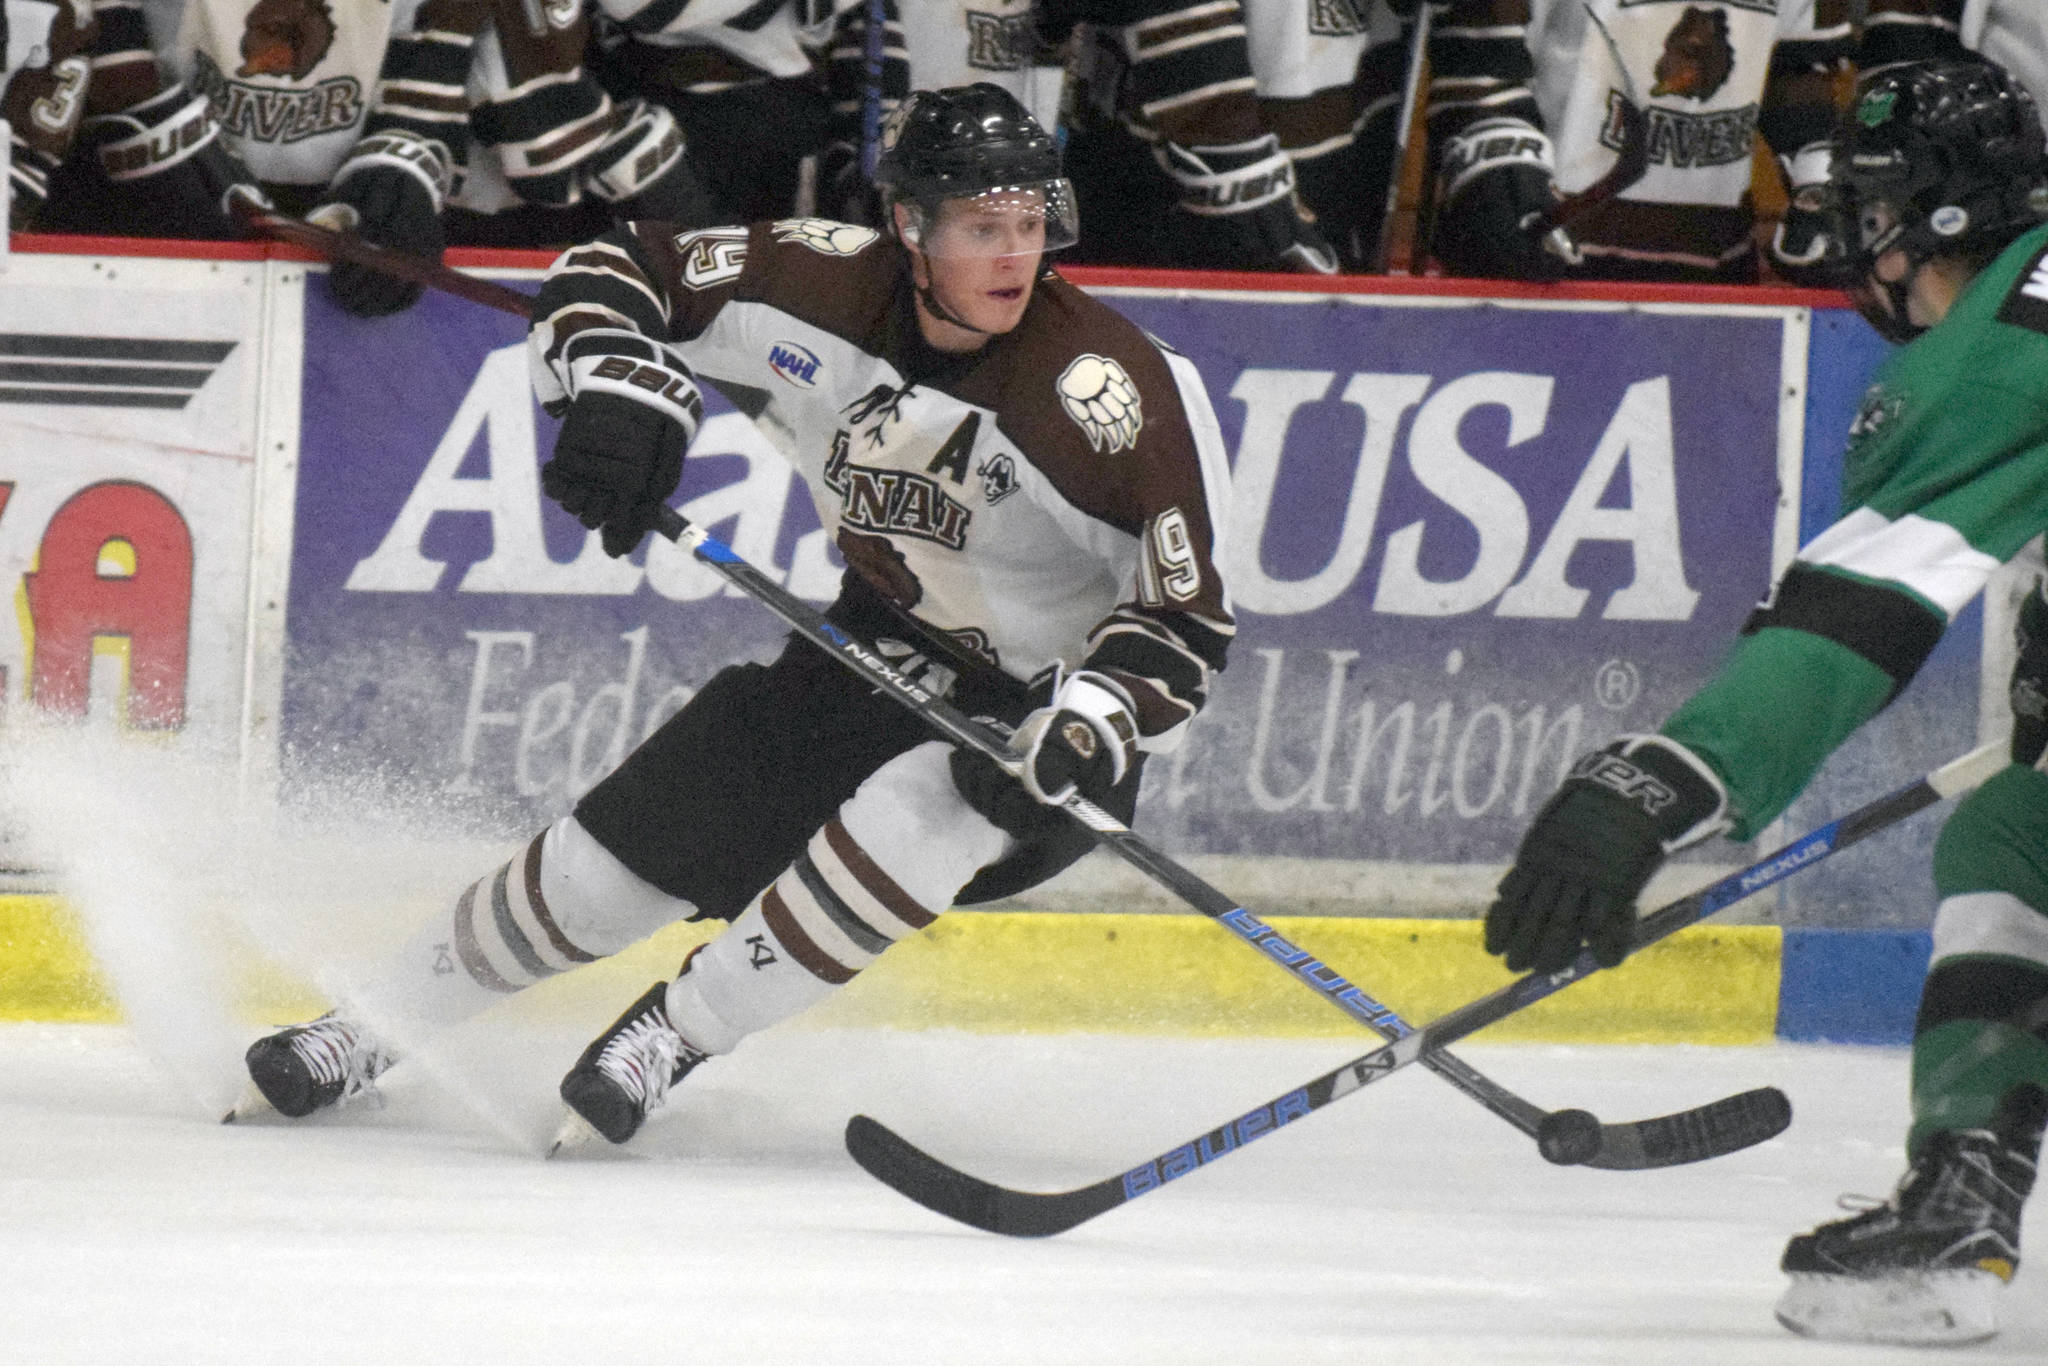 Kenai River Brown Bears forward Michael Spethmann looks to make a play as he enters the zone Friday, Oct. 5, 2018, against the Chippewa (Wisconsin) Steel at the Soldotna Regional Sports Complex. (Photo by Jeff Helminiak/Peninsula Clarion)